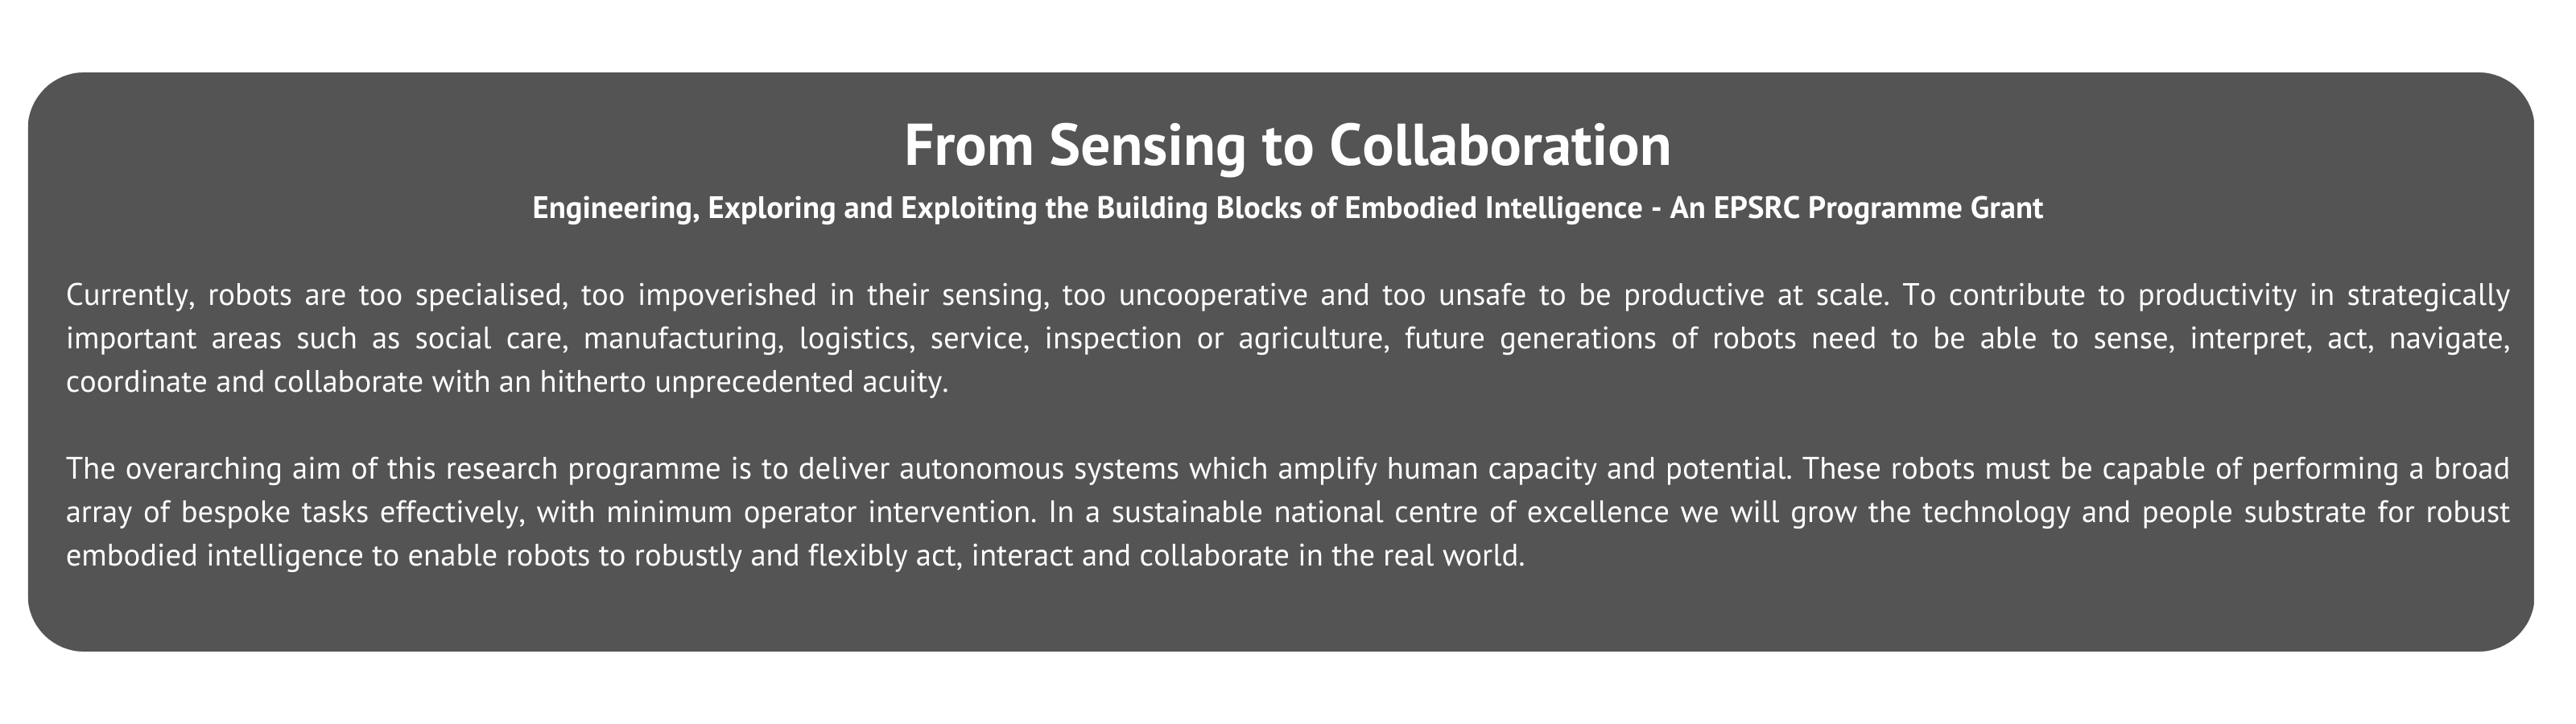 from sensing to collaboration 